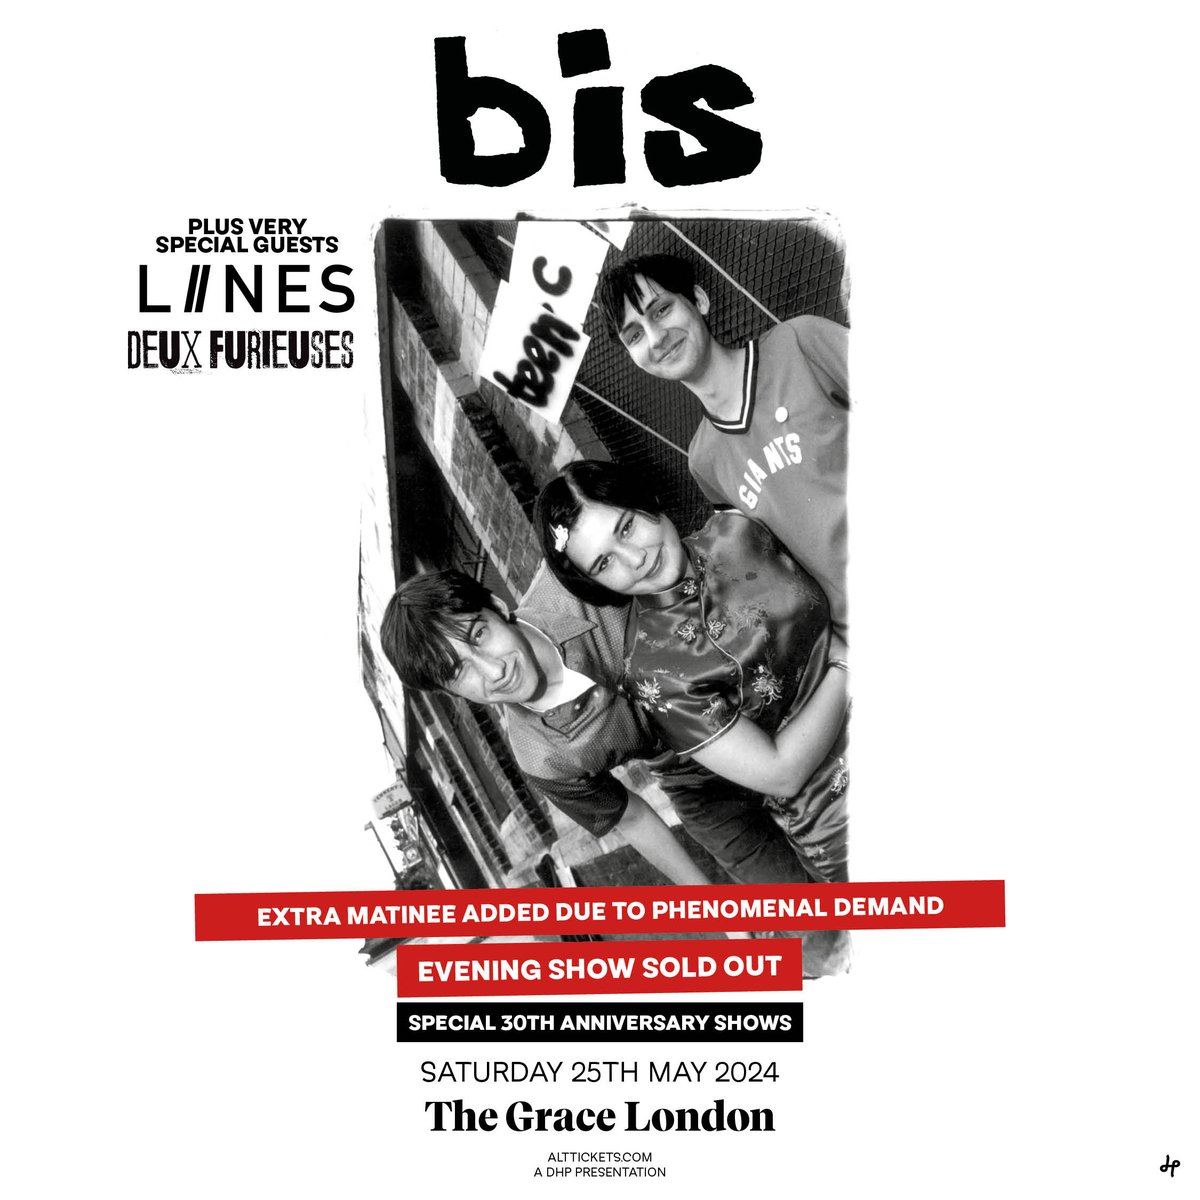 The @thebandbis evening show is now SOLD-OUT! Support for the show are now confirmed as @WEARELIINES +@DEUXFURIEUSES this May. Act fast if you want a matinee spot... 📅 Saturday 25 May 2024 🎟️ Tickets 👉 ticketweb.uk/event/bis-mati…